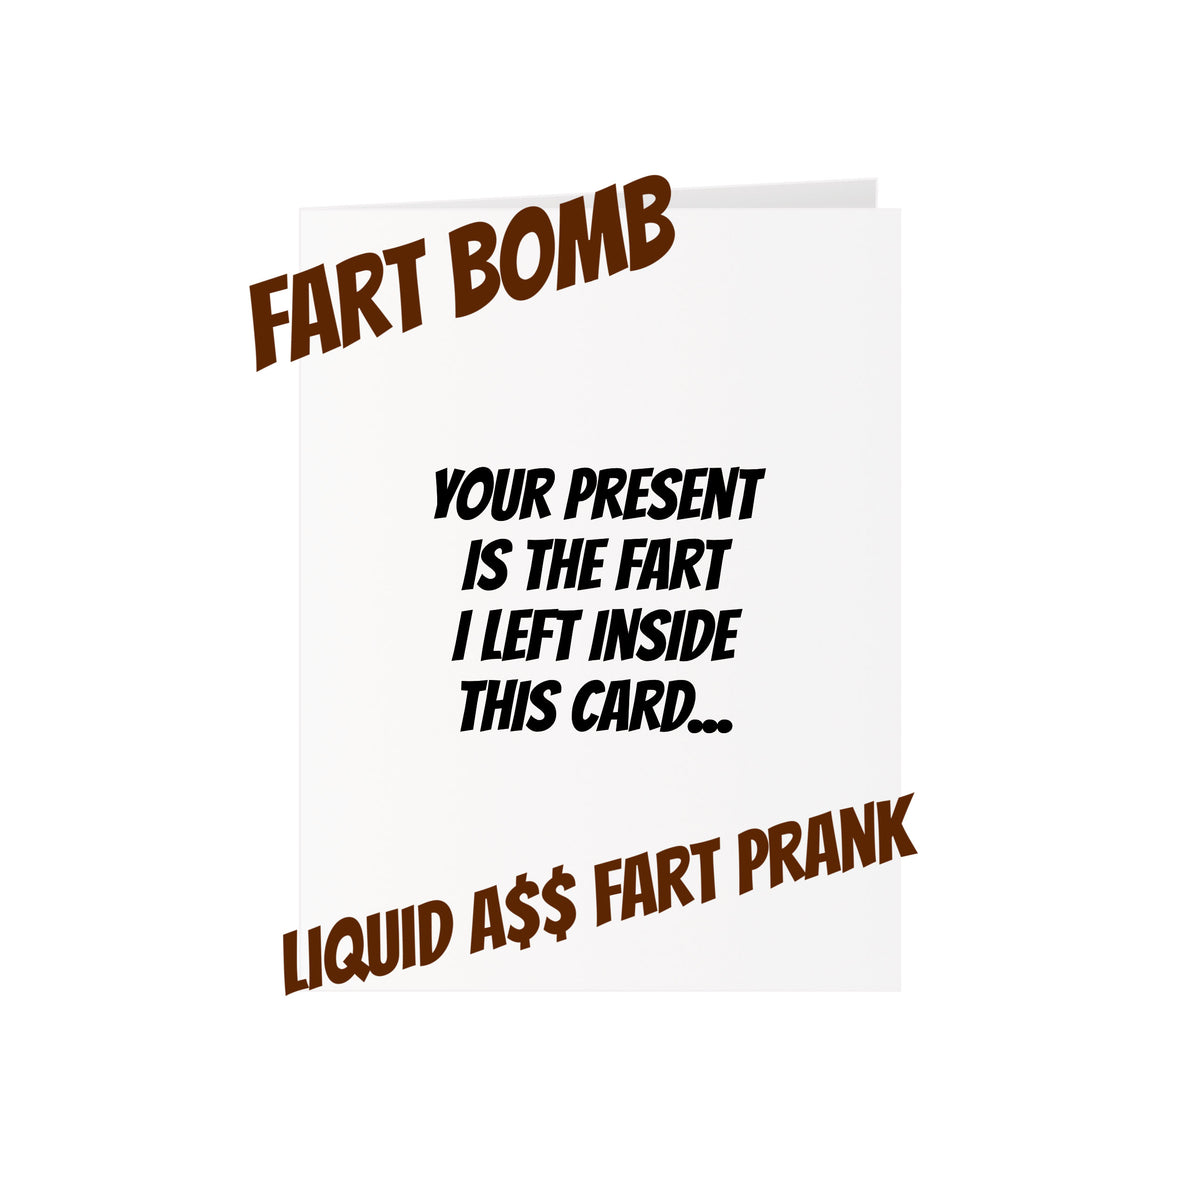 Endless Father's Day Farts with Glitter, ''It Farts When You Press it!''  Embarrassing Mail Prank Card